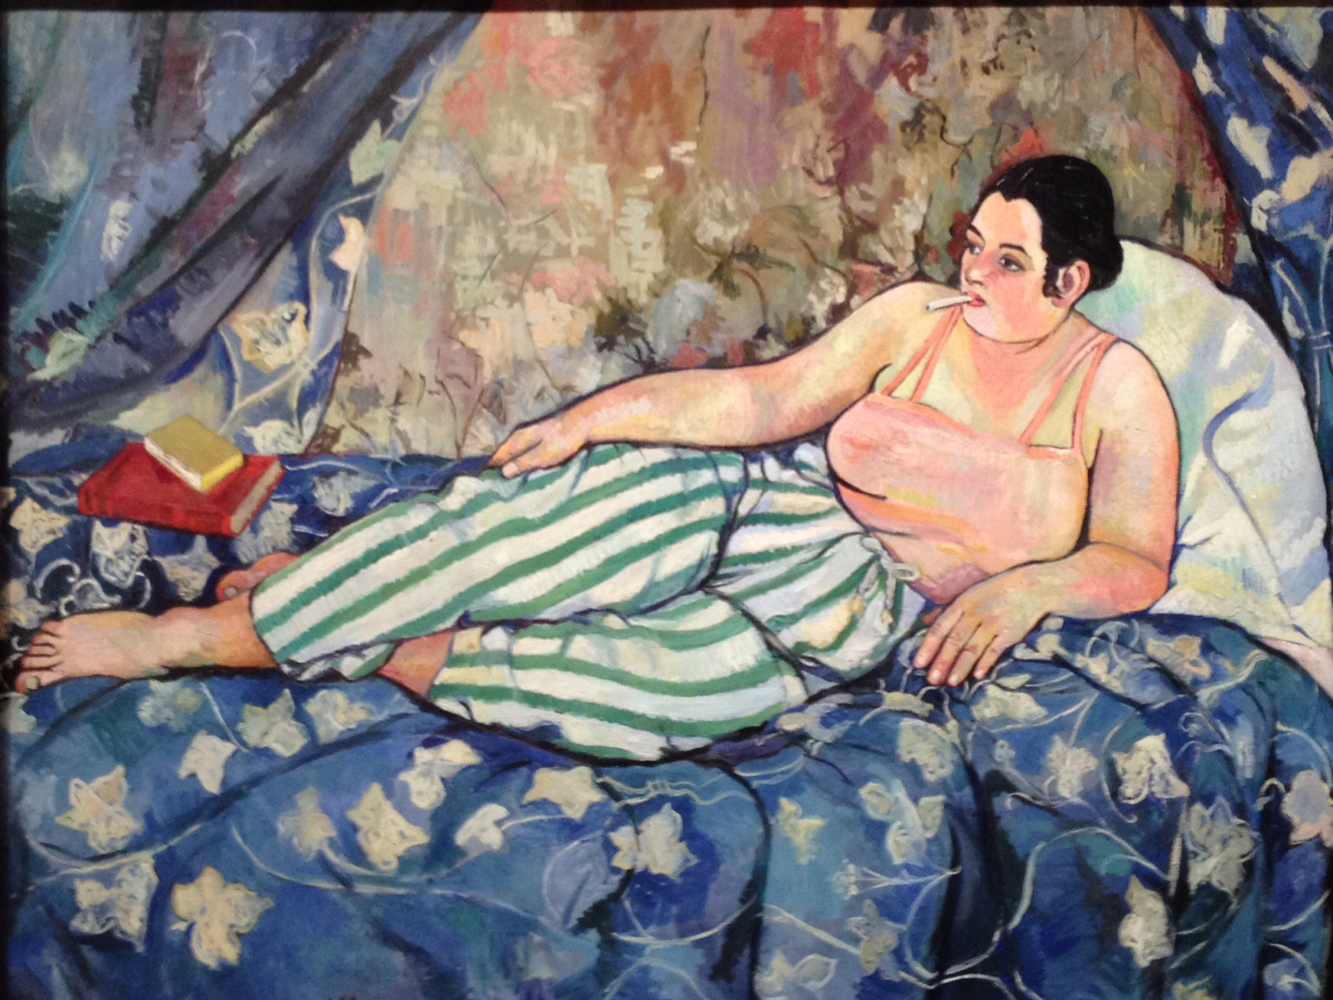 The Blue Room [Suzanne Valadon] | Sartle - Rogue Art History